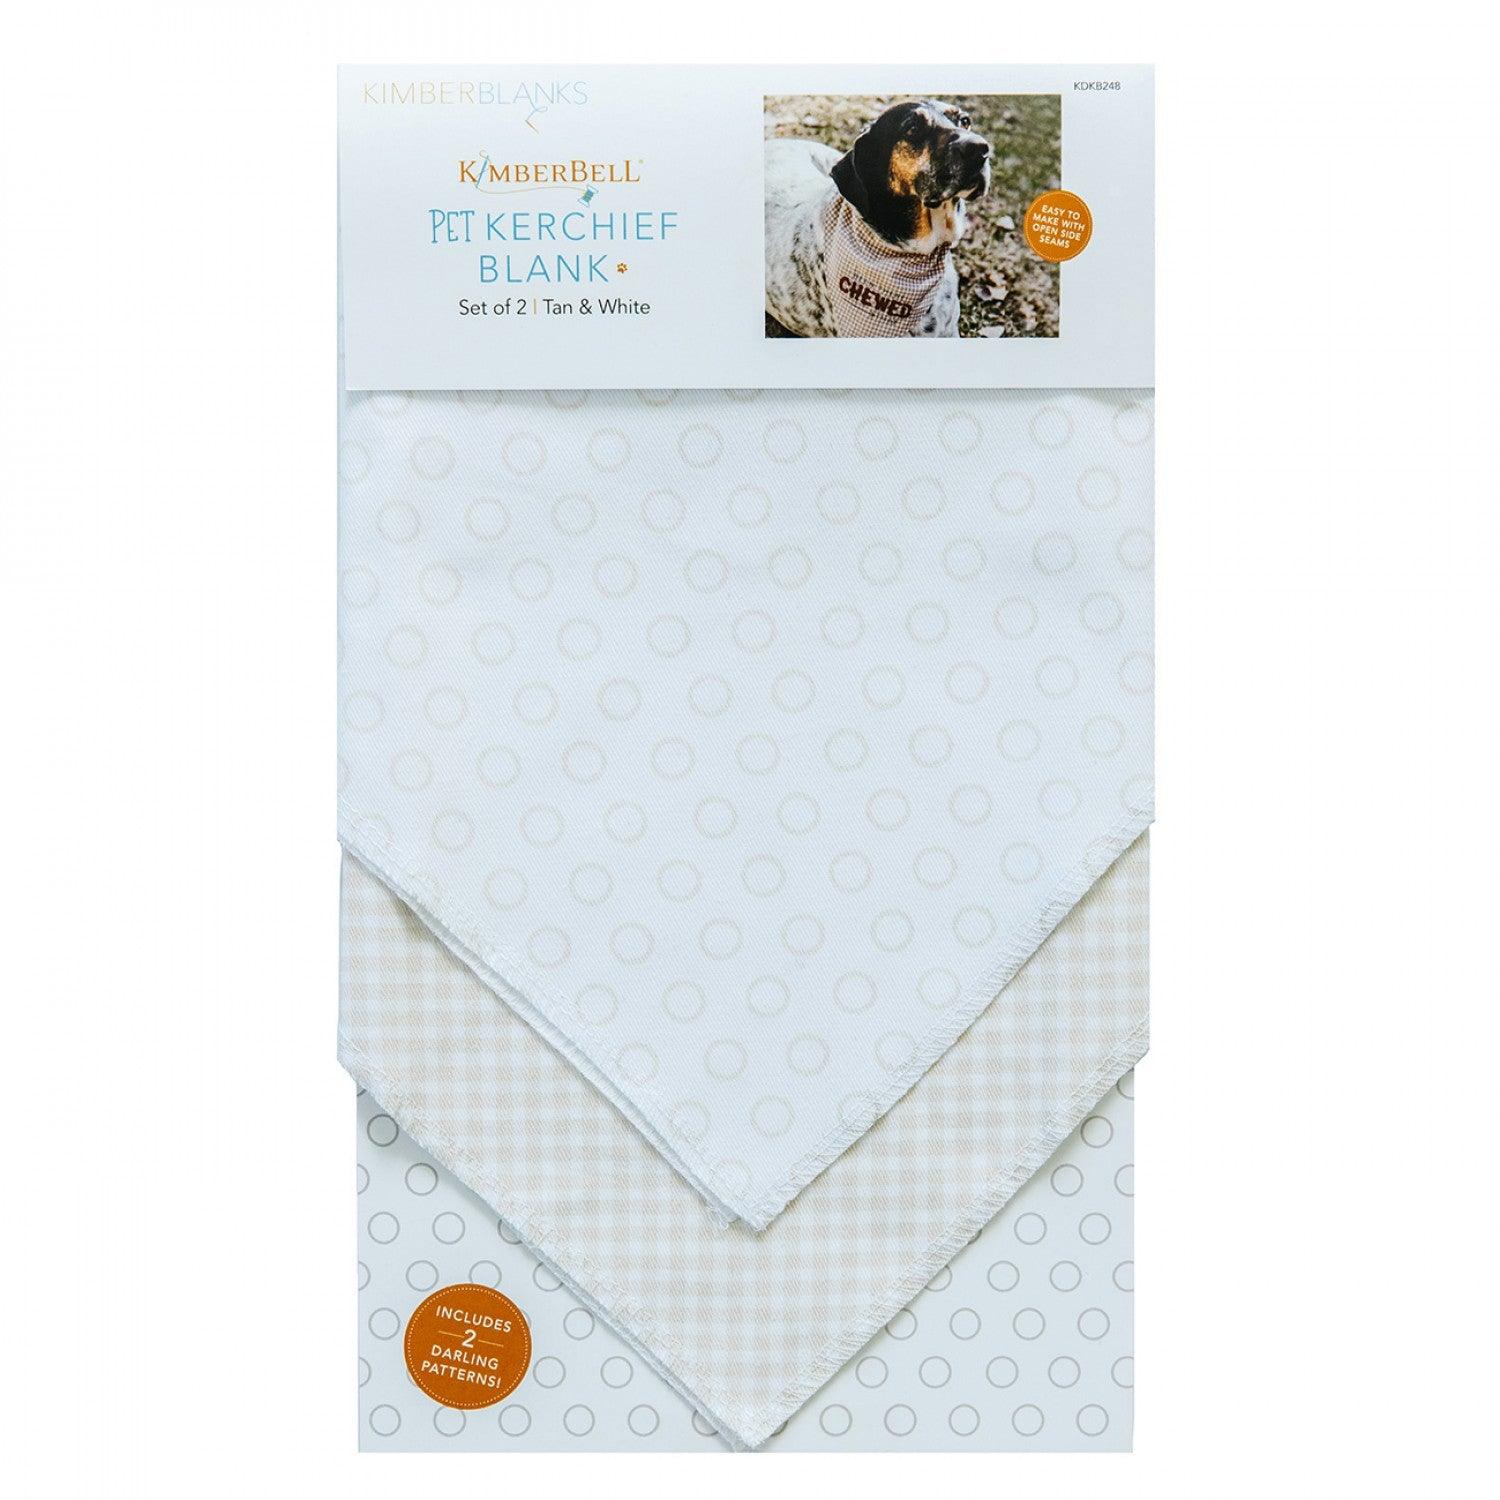 Pet Kerchief - Tan & White - Blank - Package of 2- Kimberbell - Kawartha Quilting and Sewing LTD.